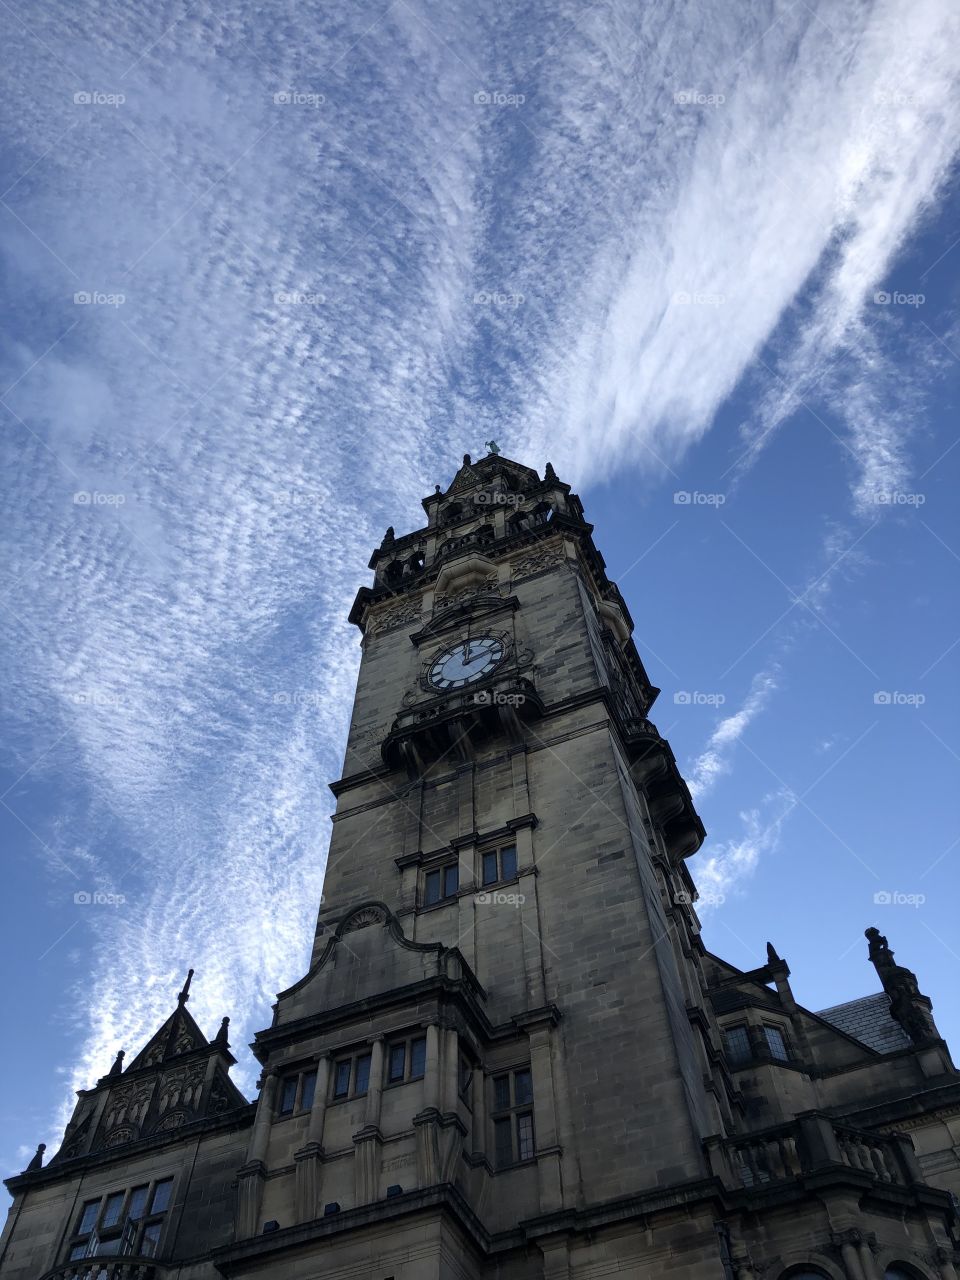 Sheffield Town Hall